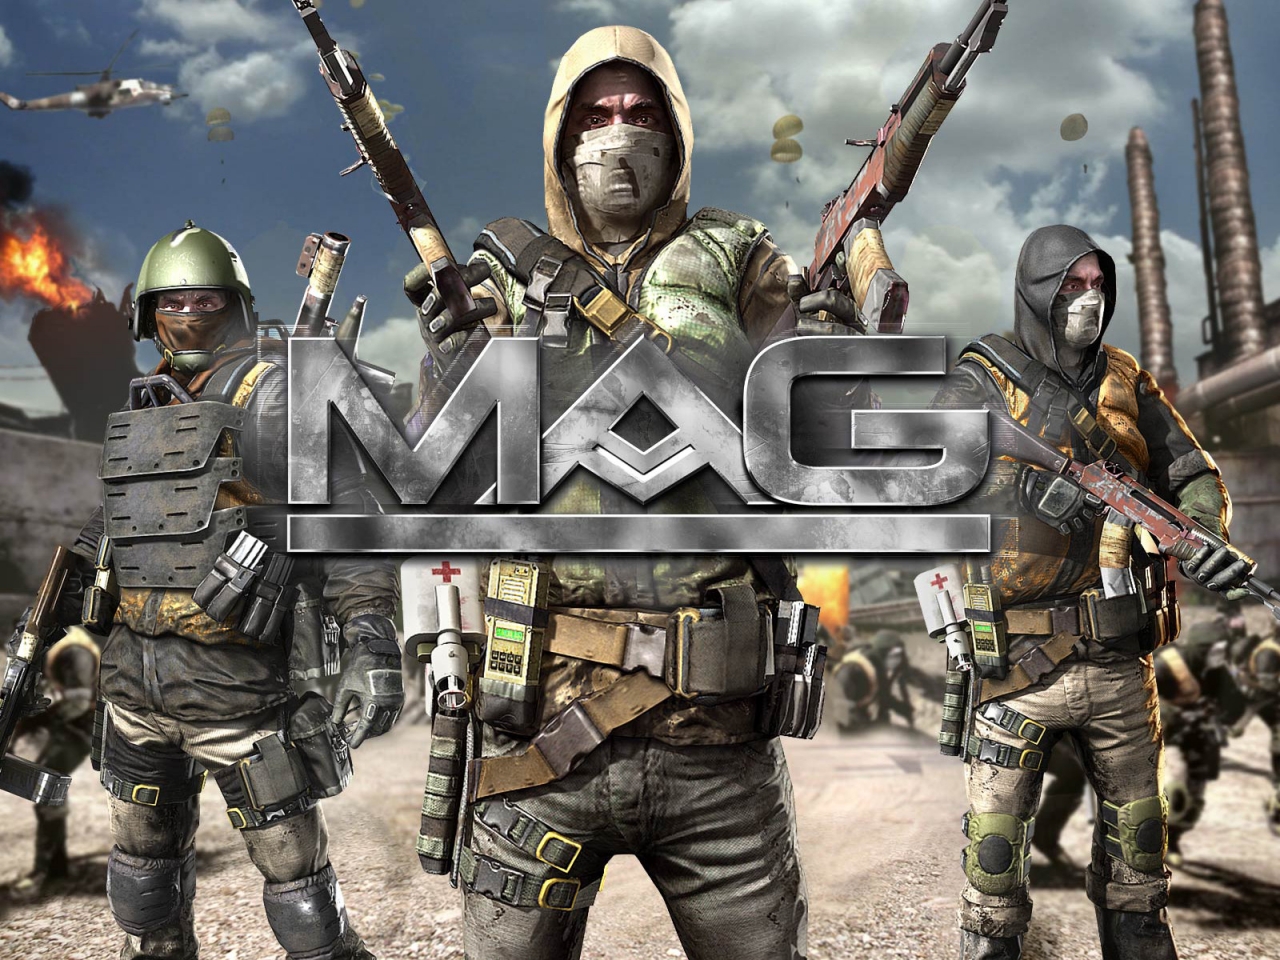 MAG Game for 1280 x 960 resolution